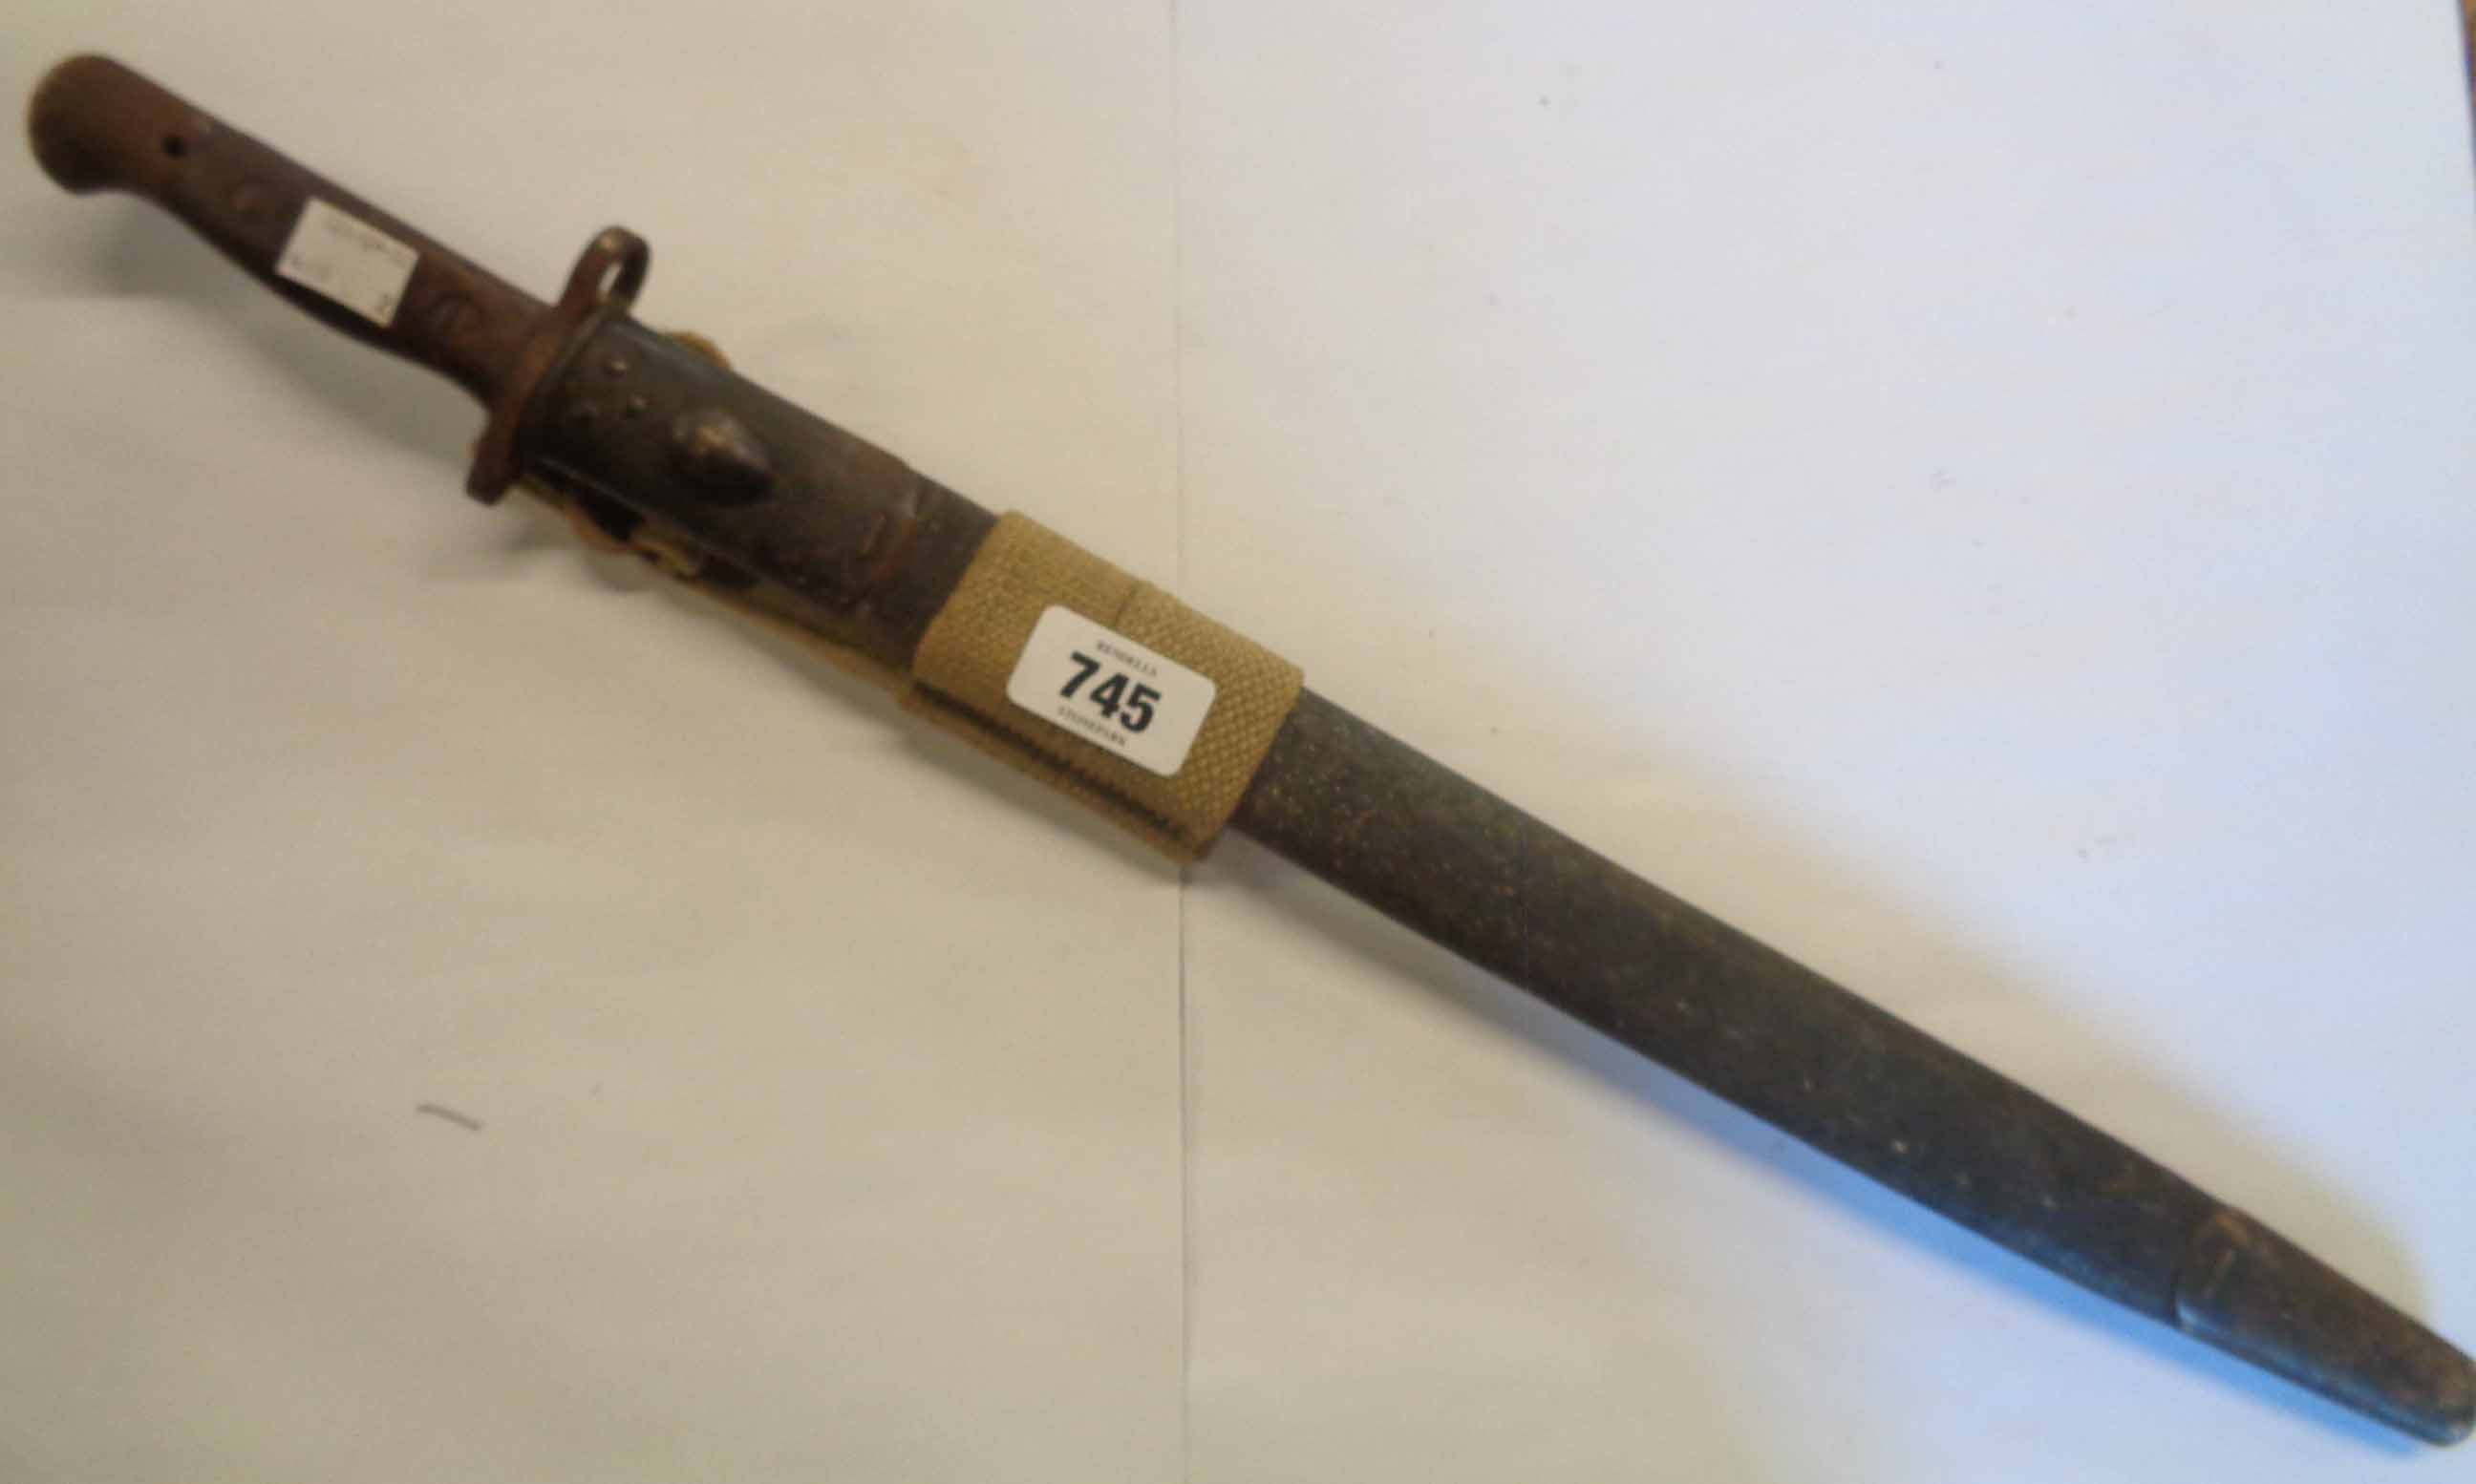 A First World War period British 1907 pattern bayonet with scabbard and frog